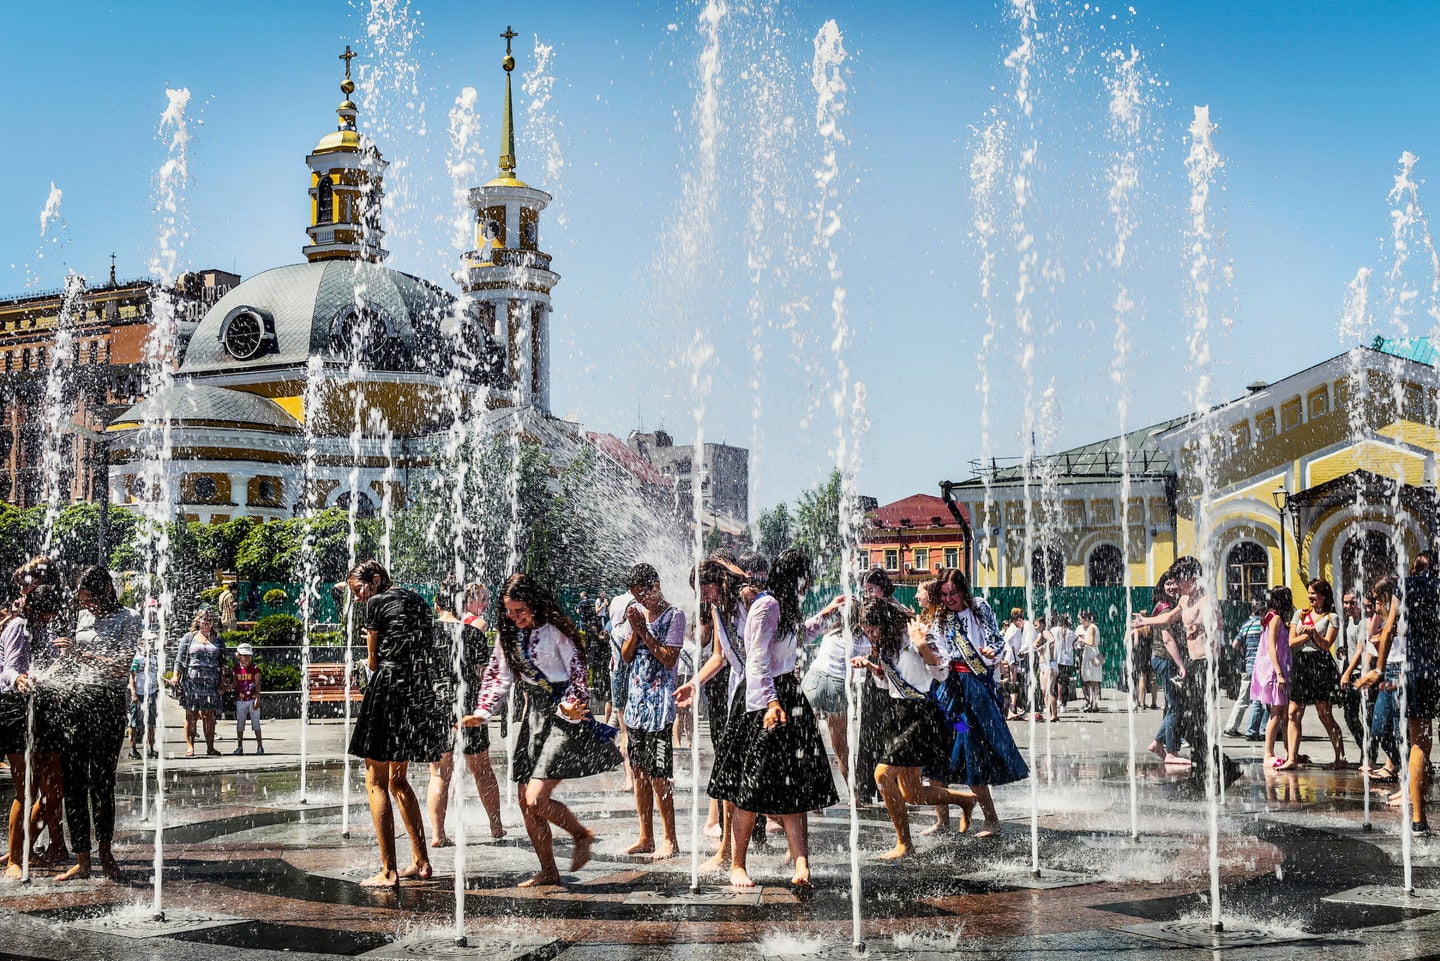 This was taken on May 30, 2018 in Kiev, Ukraine. After the Last Bell ceremony in schools, students from around the city come to Podil area of Kiev by the Dnepr river to bathe in a fountain. This is the most popular area for the students to hang out in.